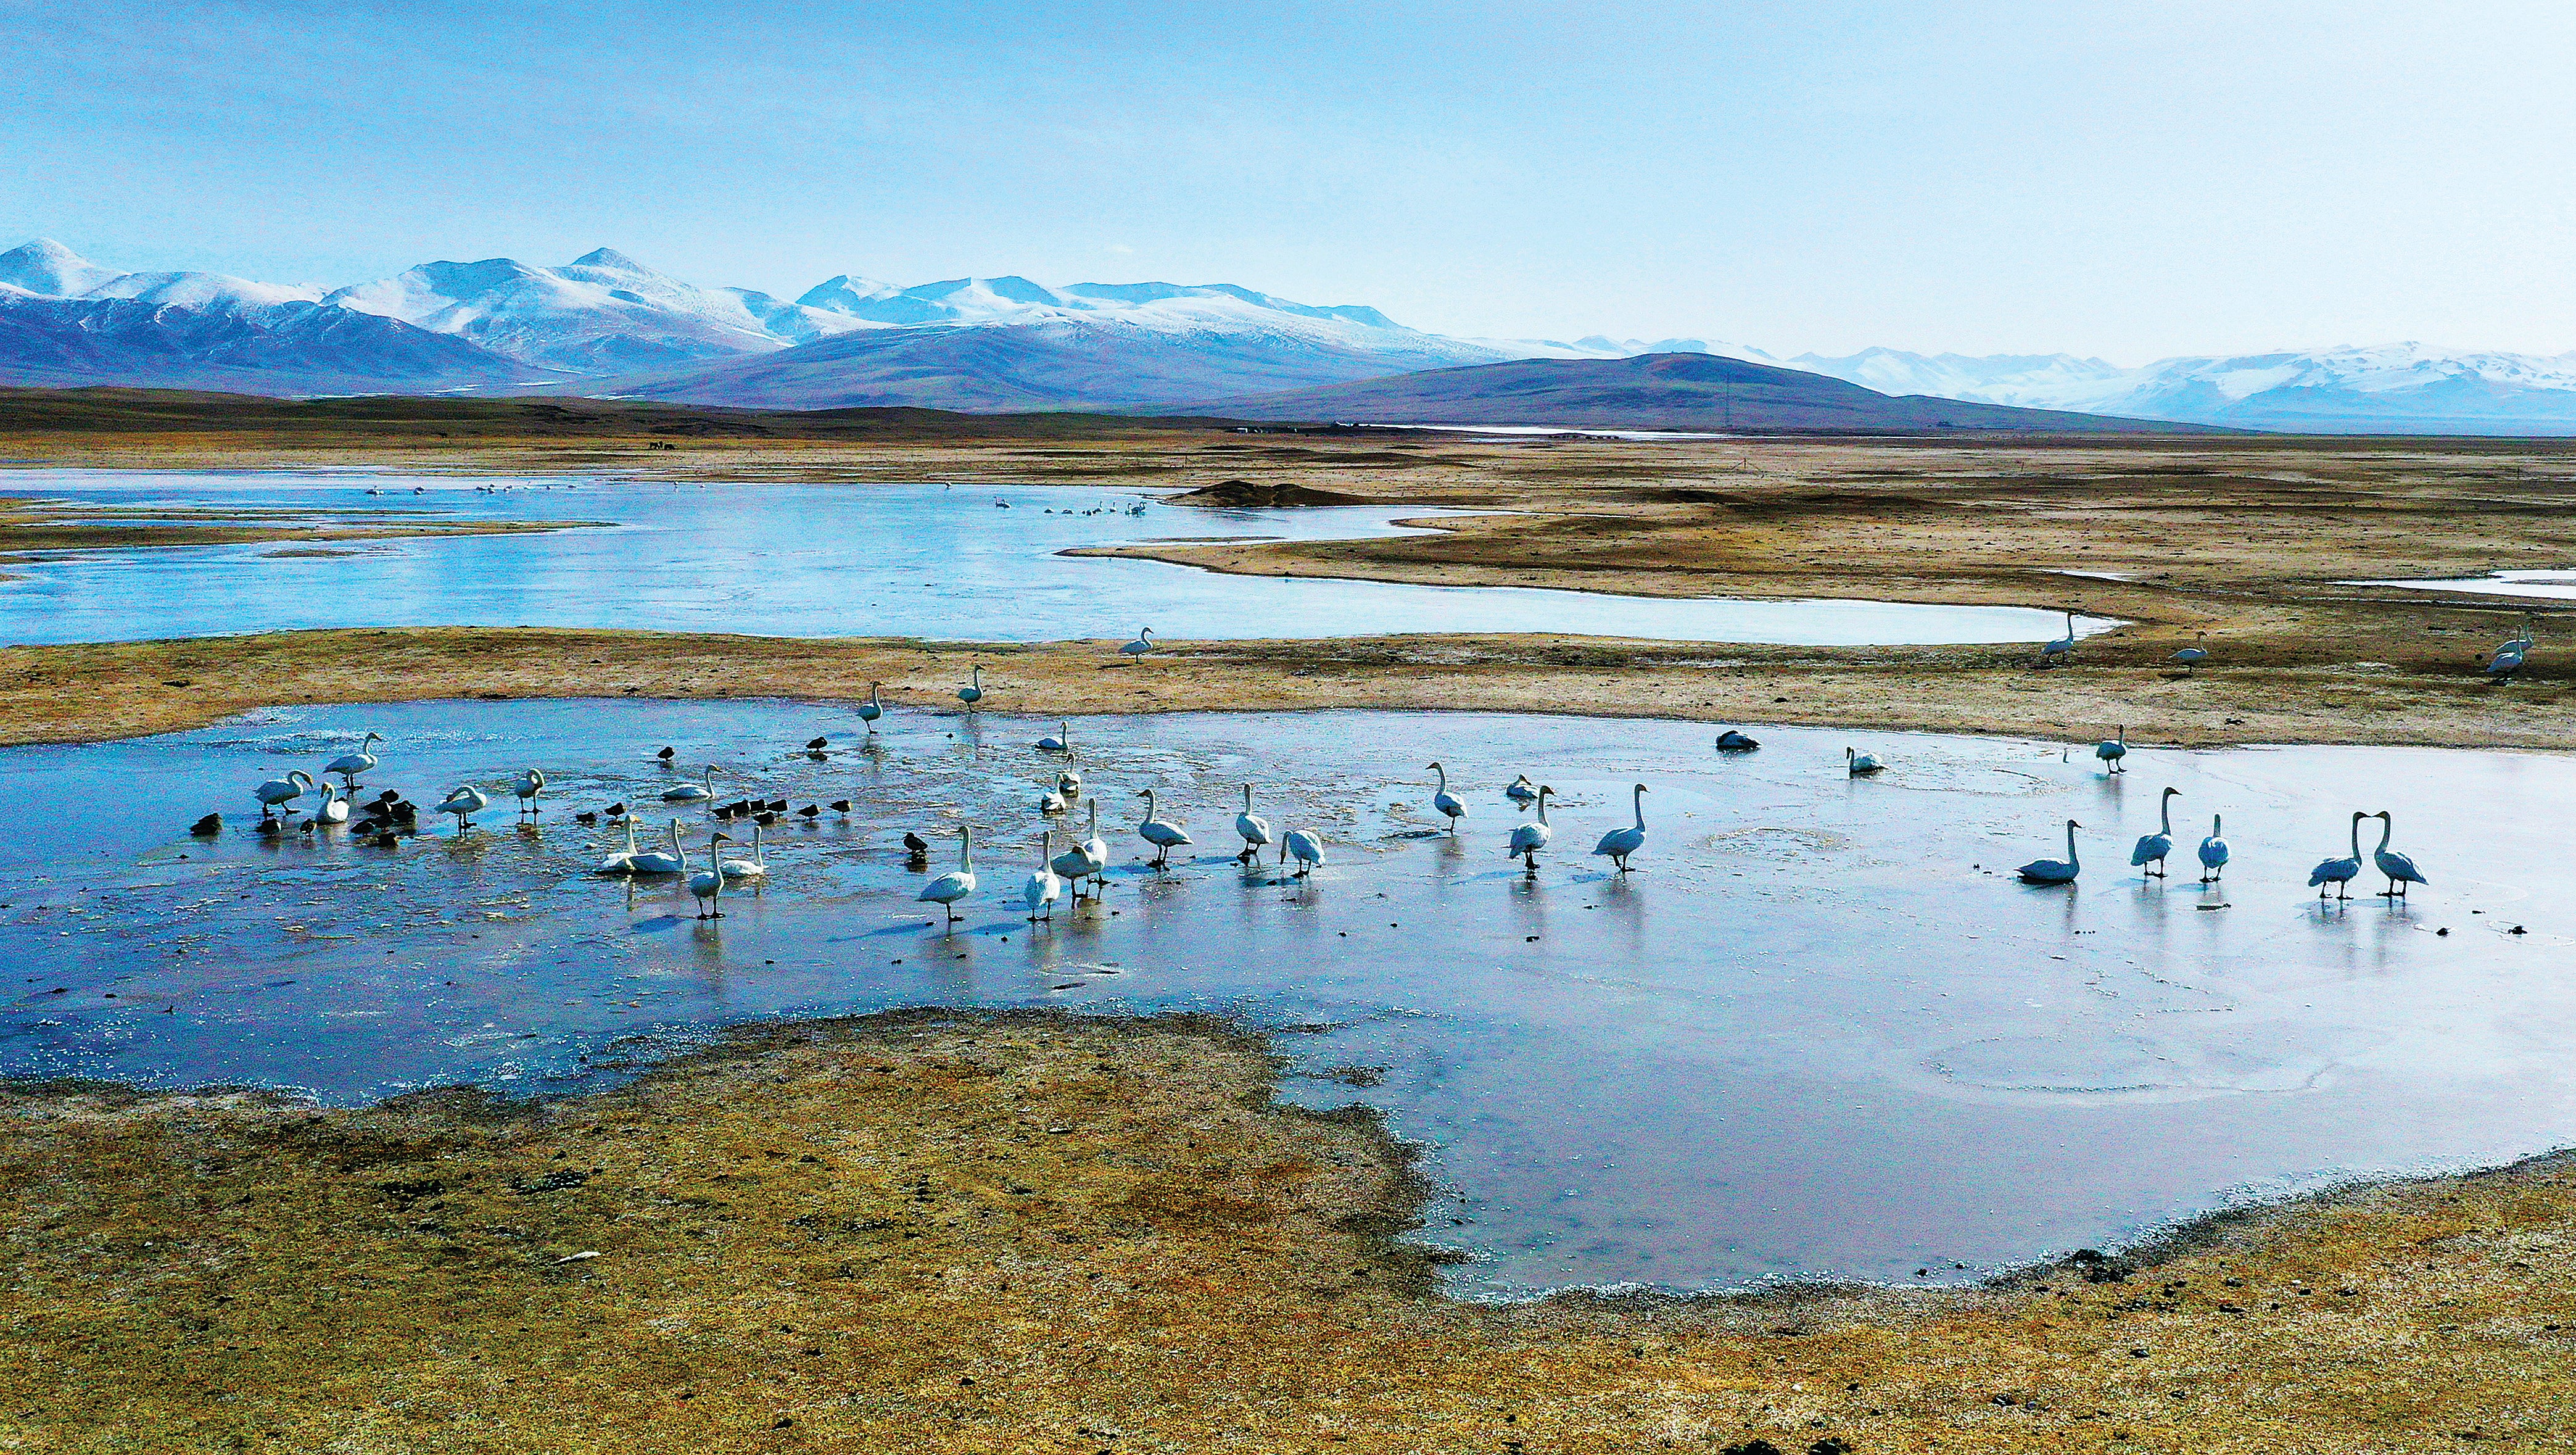 Between mid-March and April every year, swans flock to the Bayanbulak National Nature Reserve for nesting